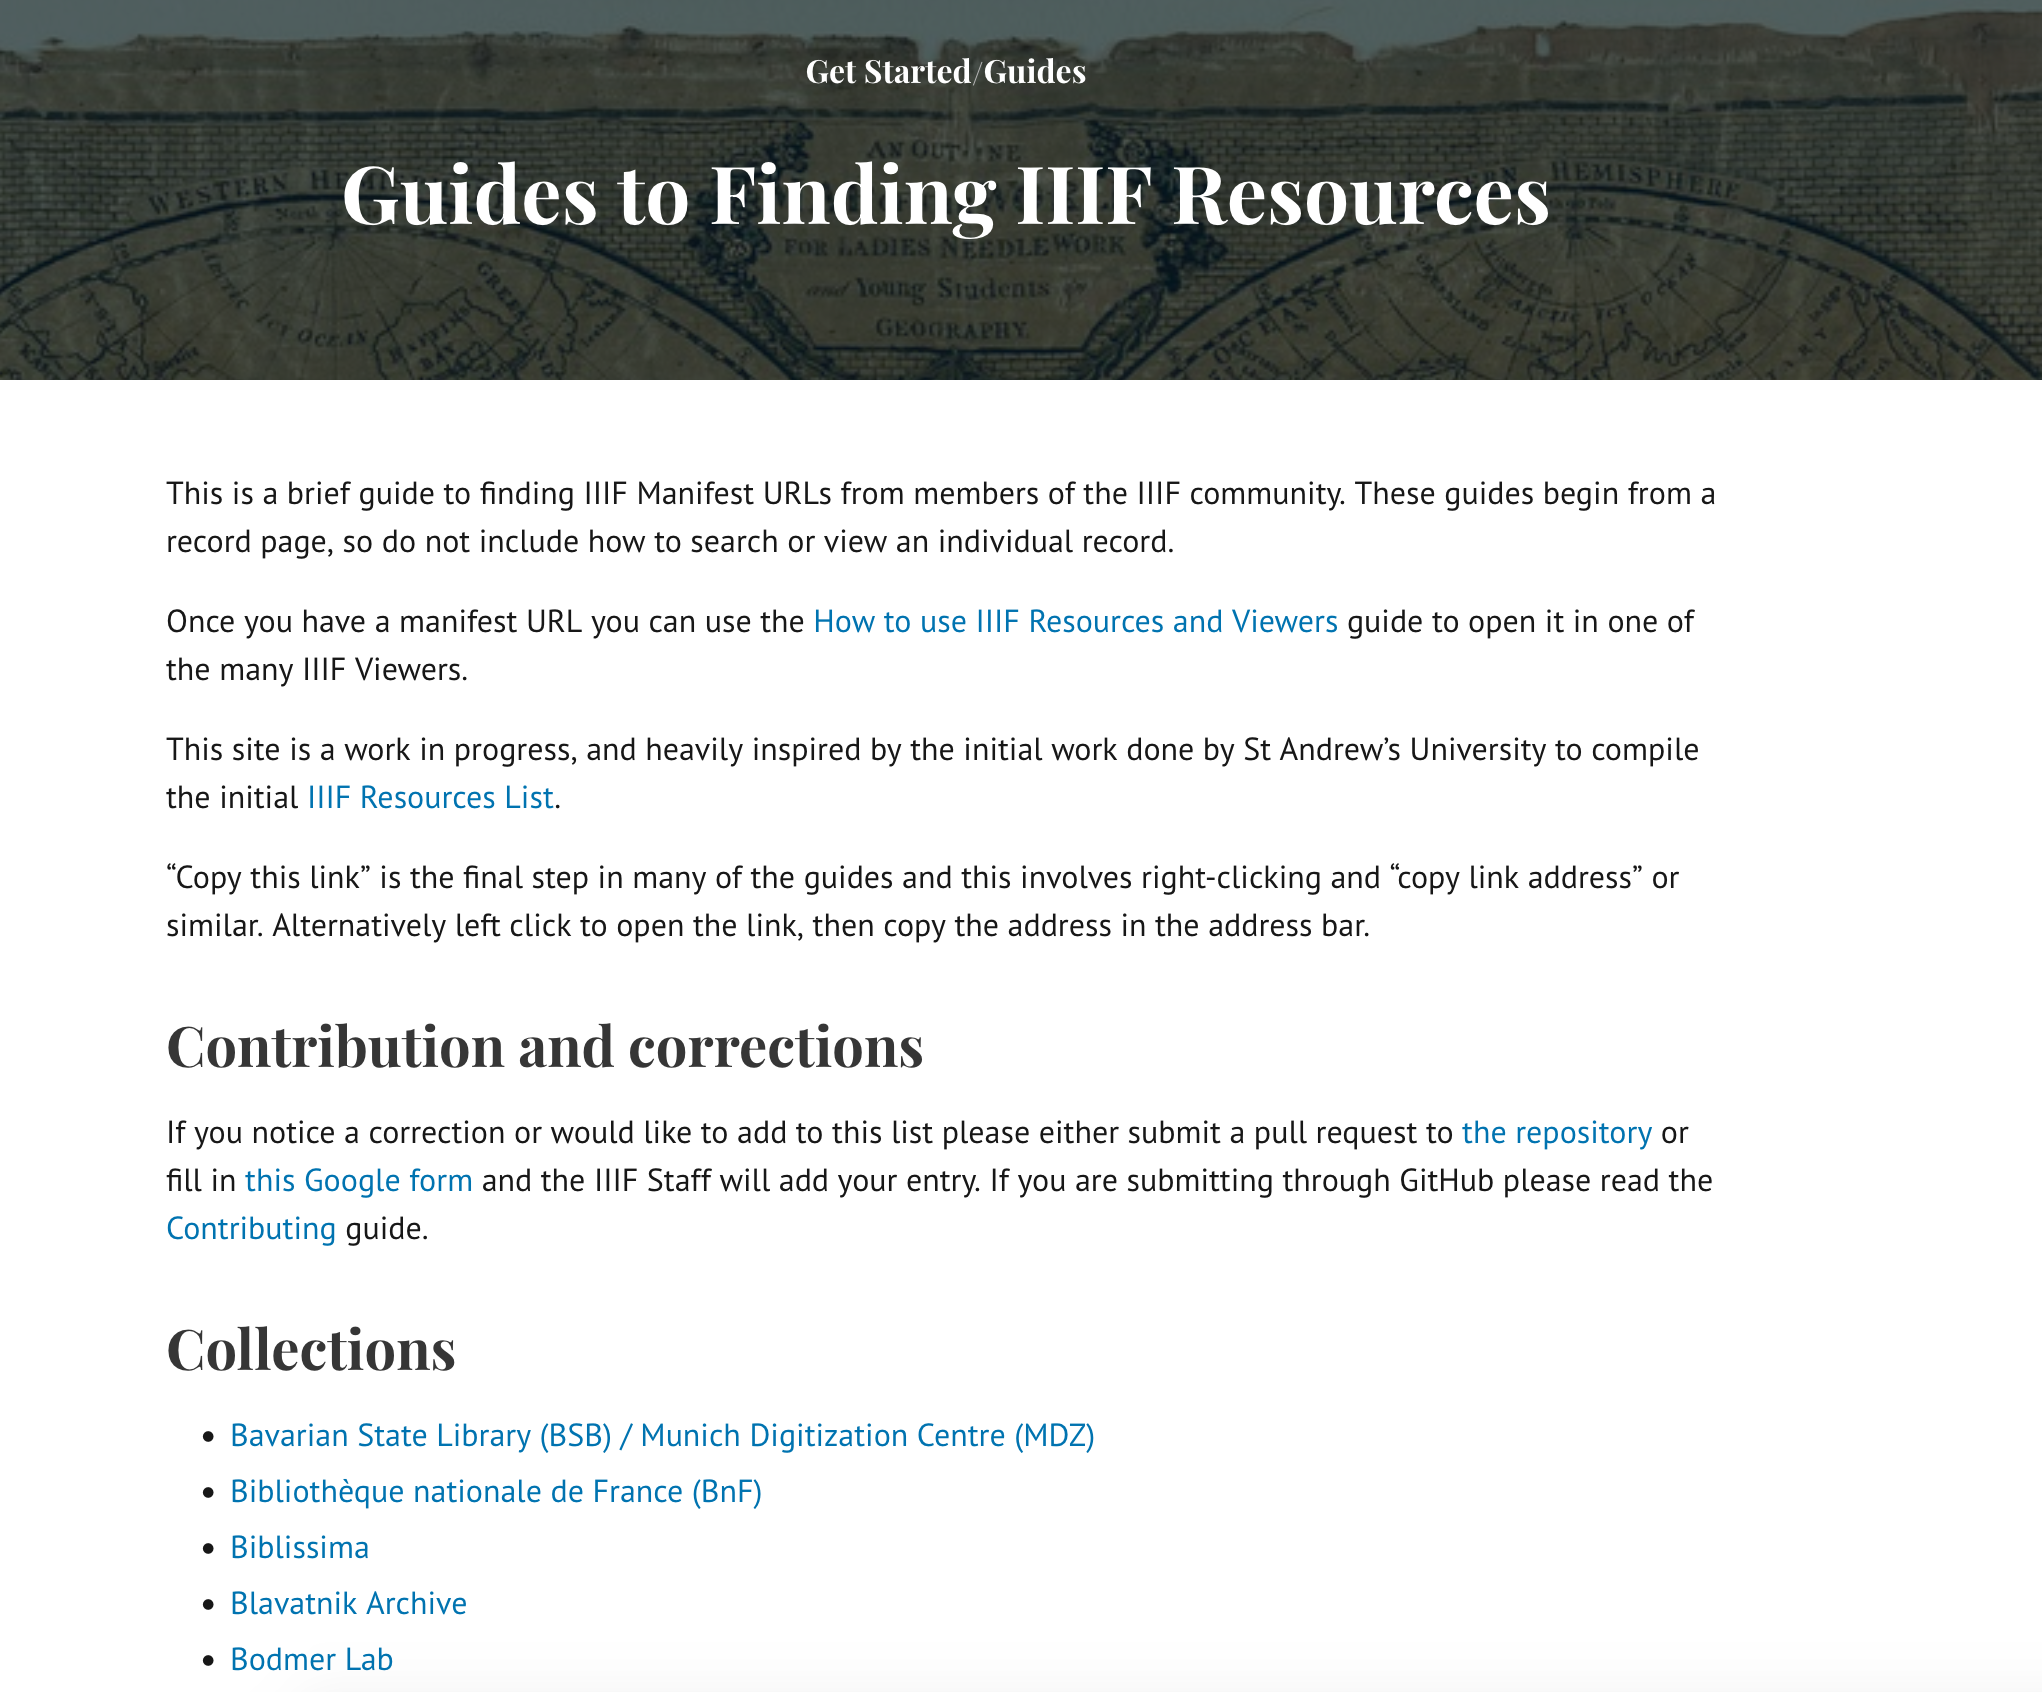 Screenshot of the Guides Website